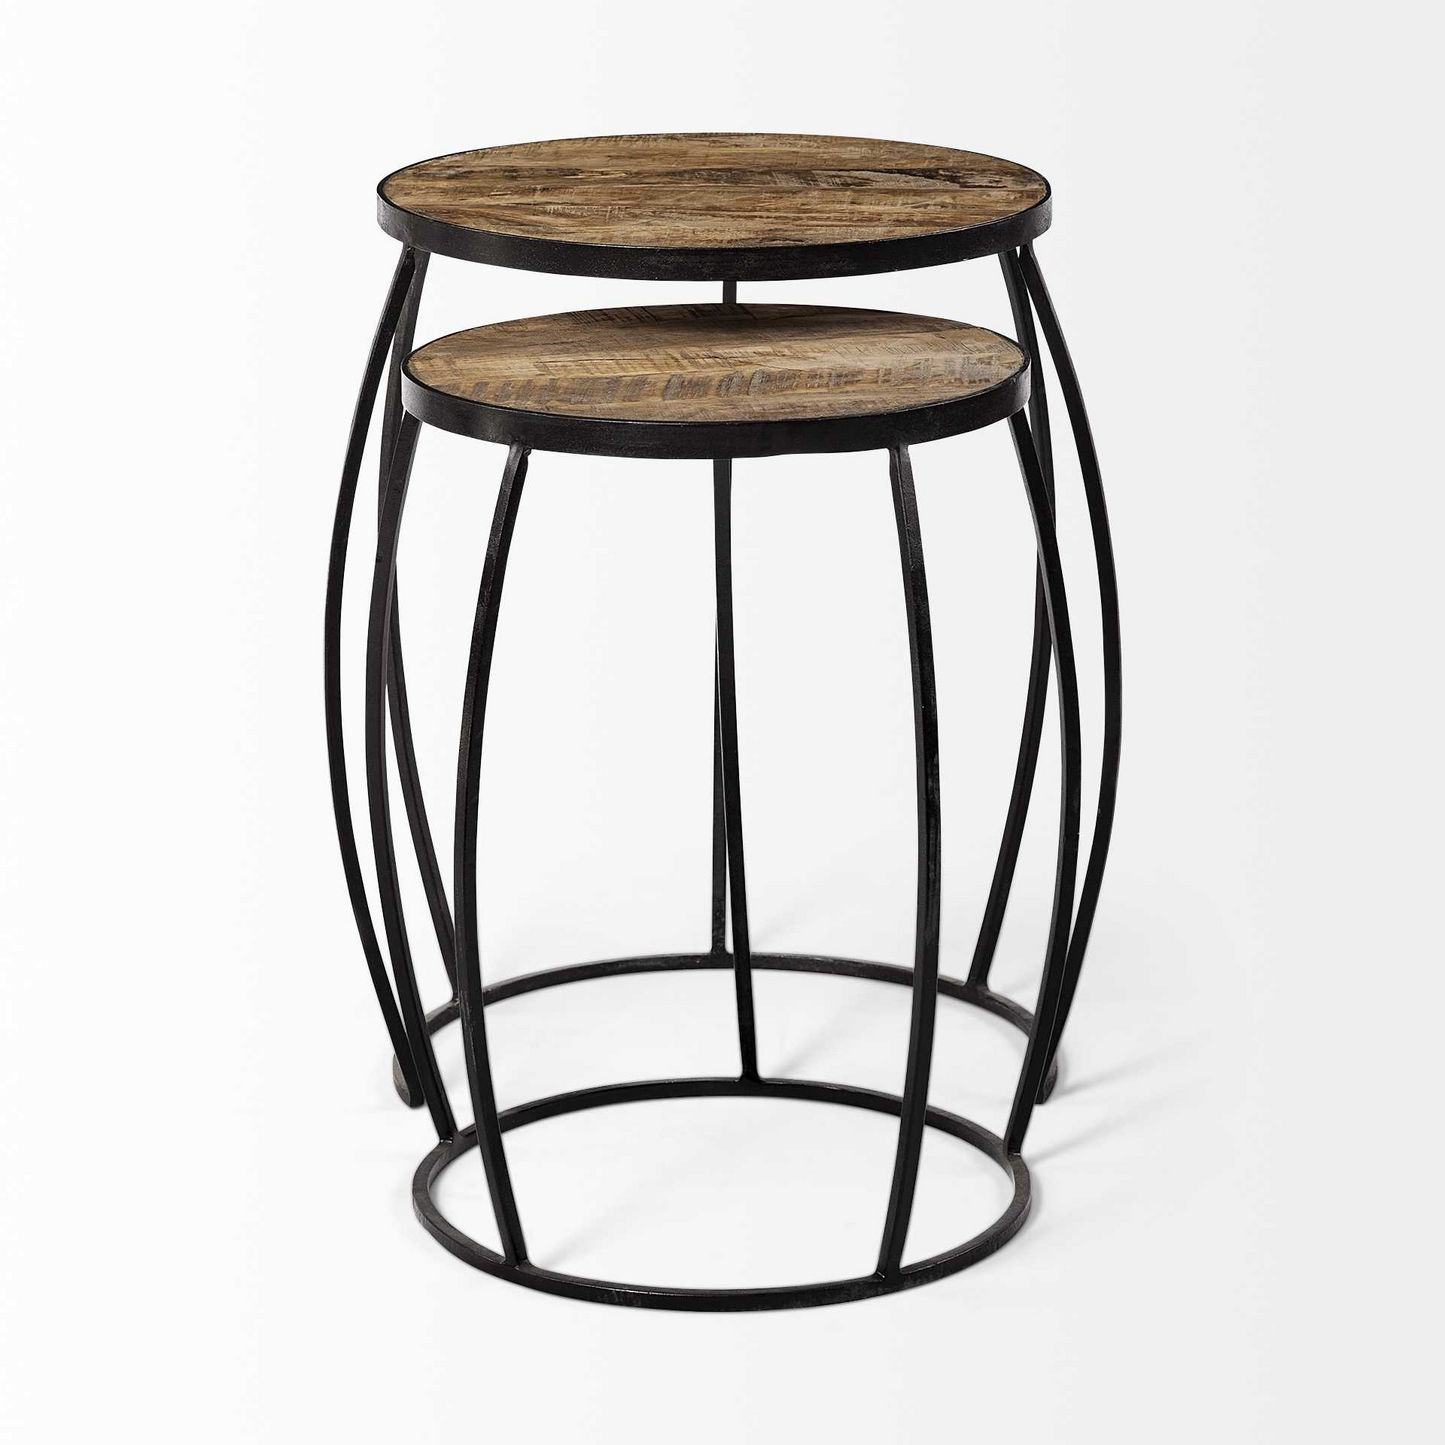 Round Wooden Top Accent Tables w/Black Metal Frame Nesting Tables (Set of 2)